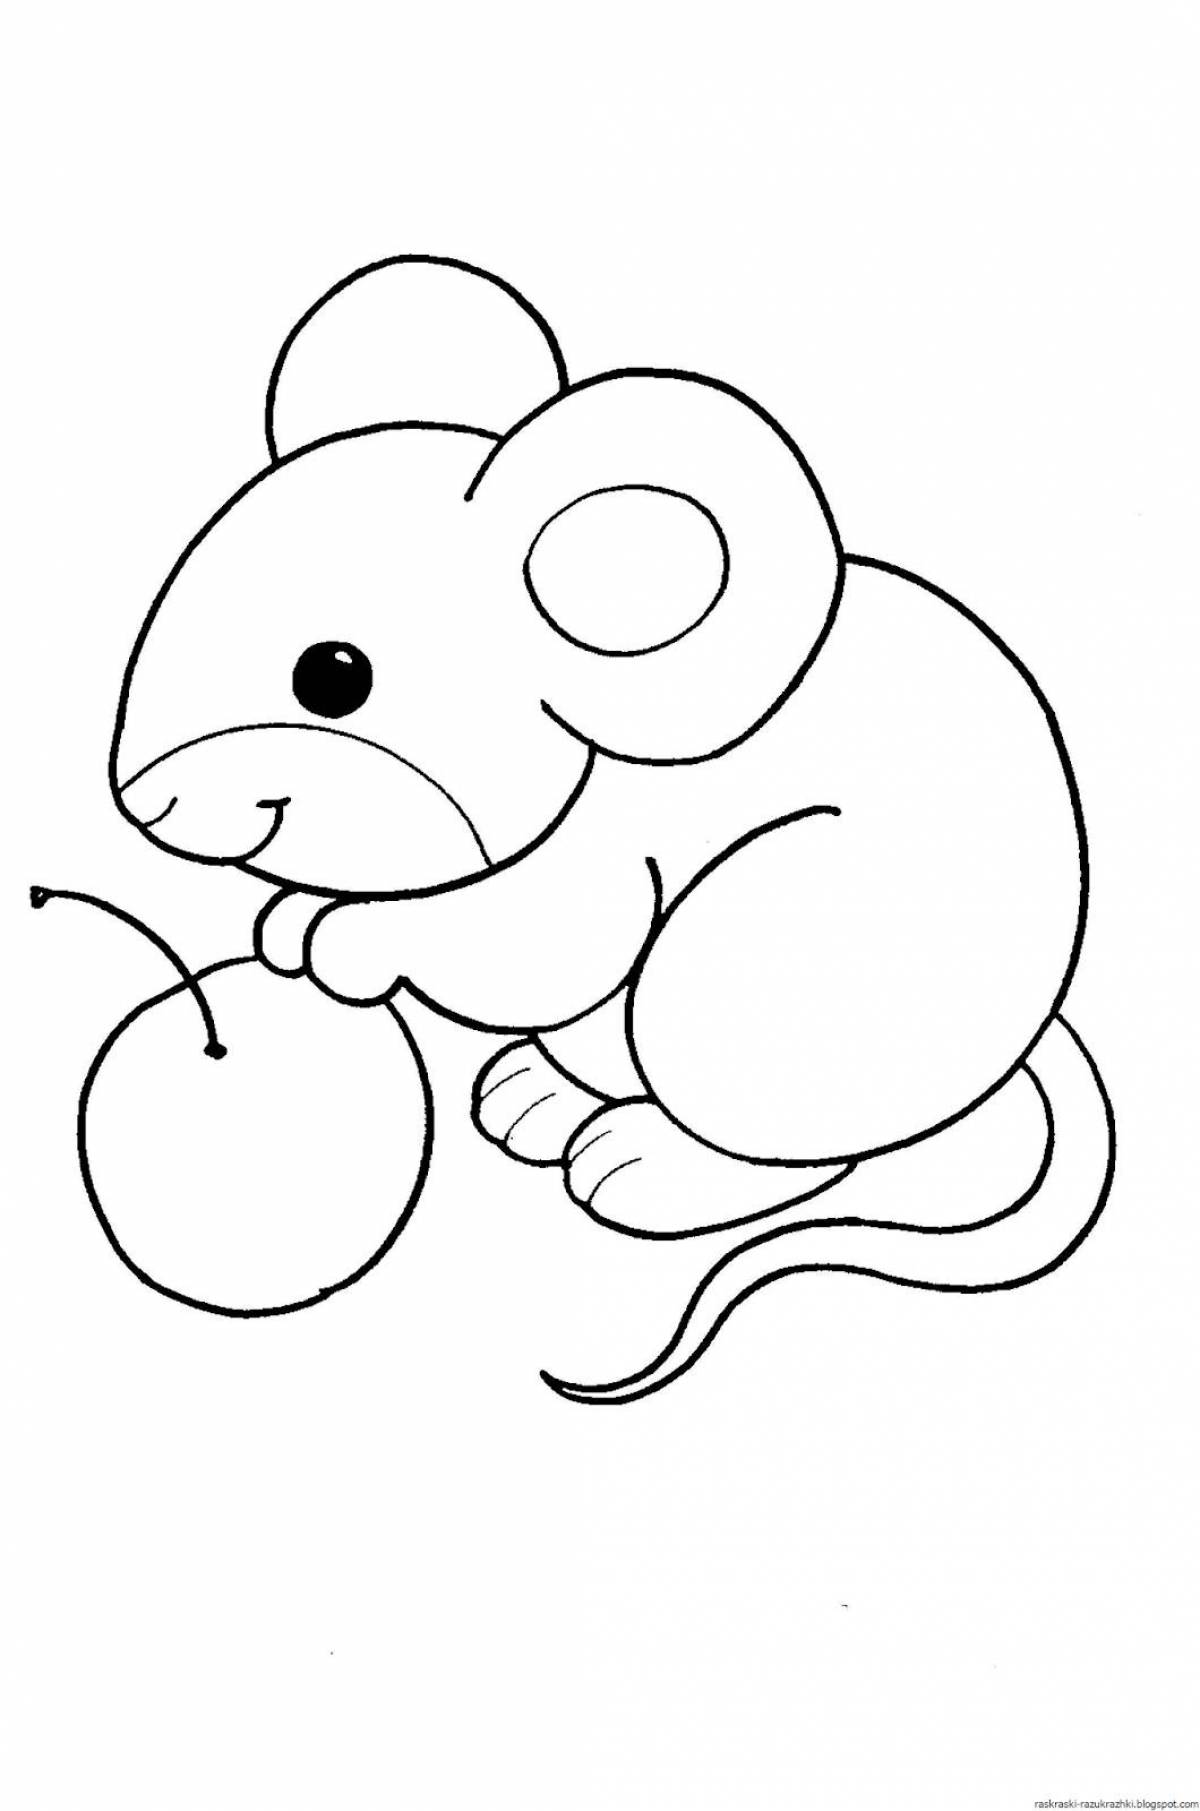 Glorious mouse coloring book for kids